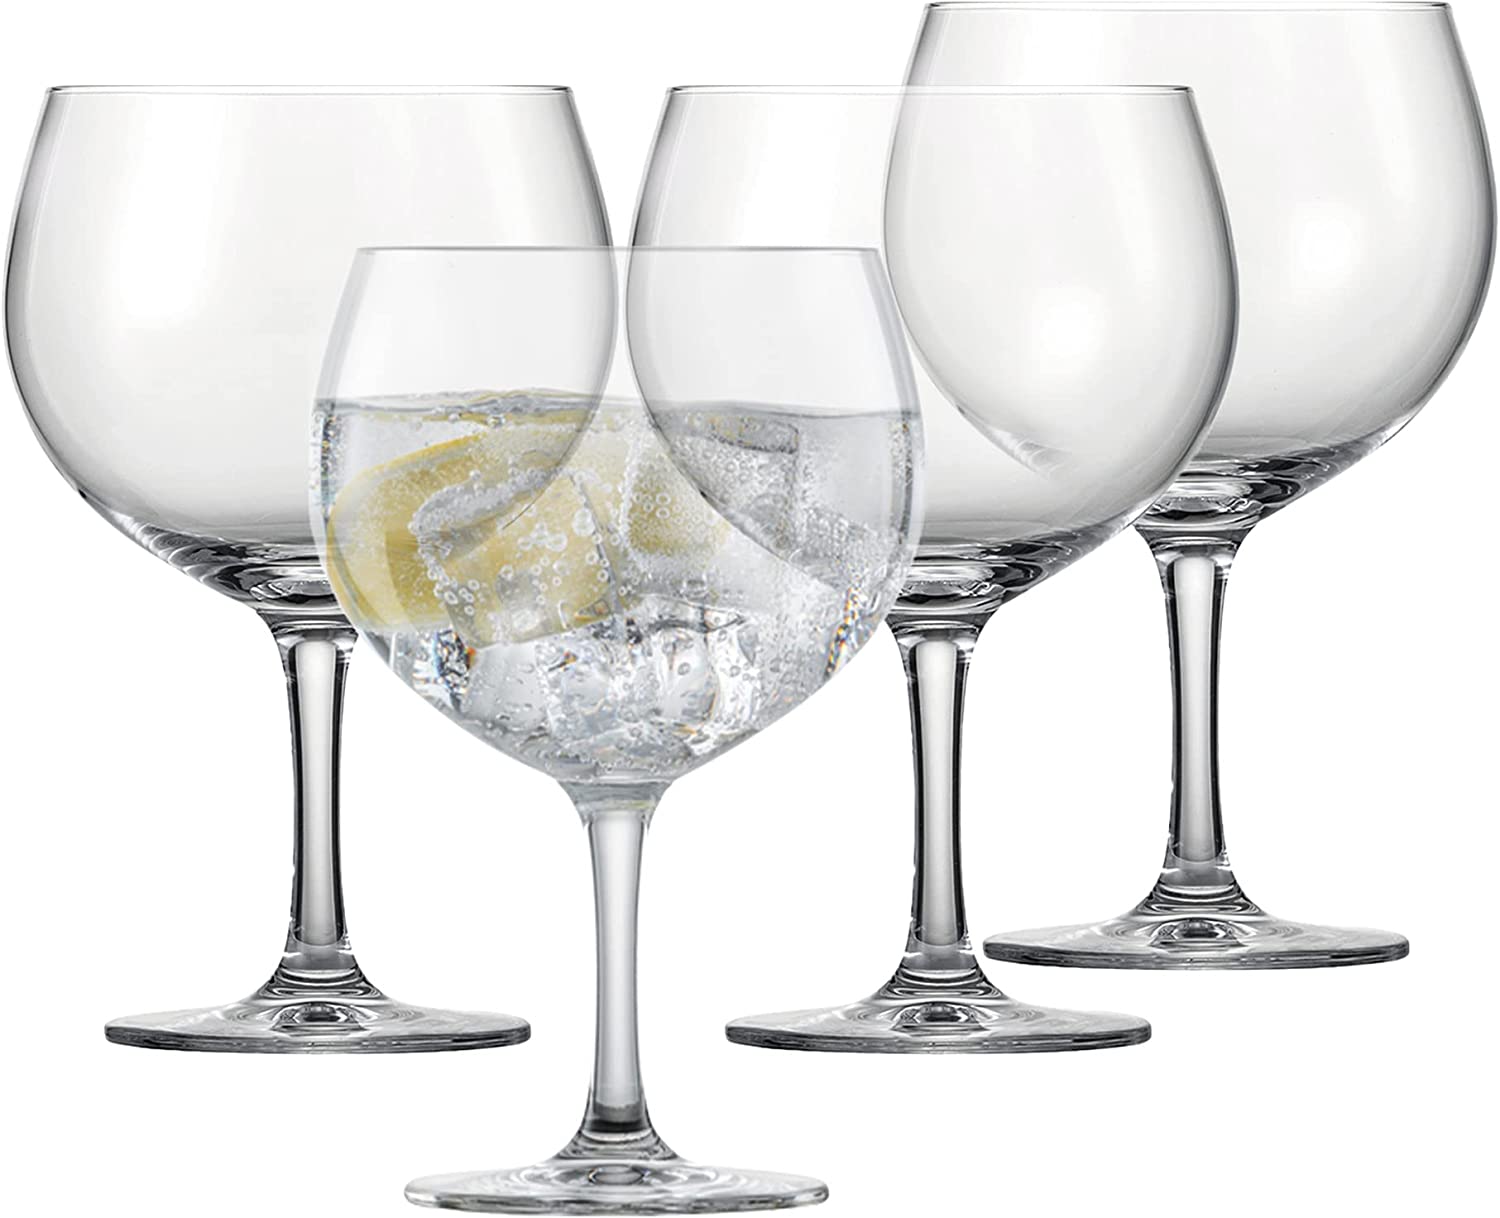 Schott Zwiesel Gin Tonic Bar Special Glasses Set of 4 Glass in Crystal Colour 11.6 cm x 11.6 cm x 17.8 cm 130002